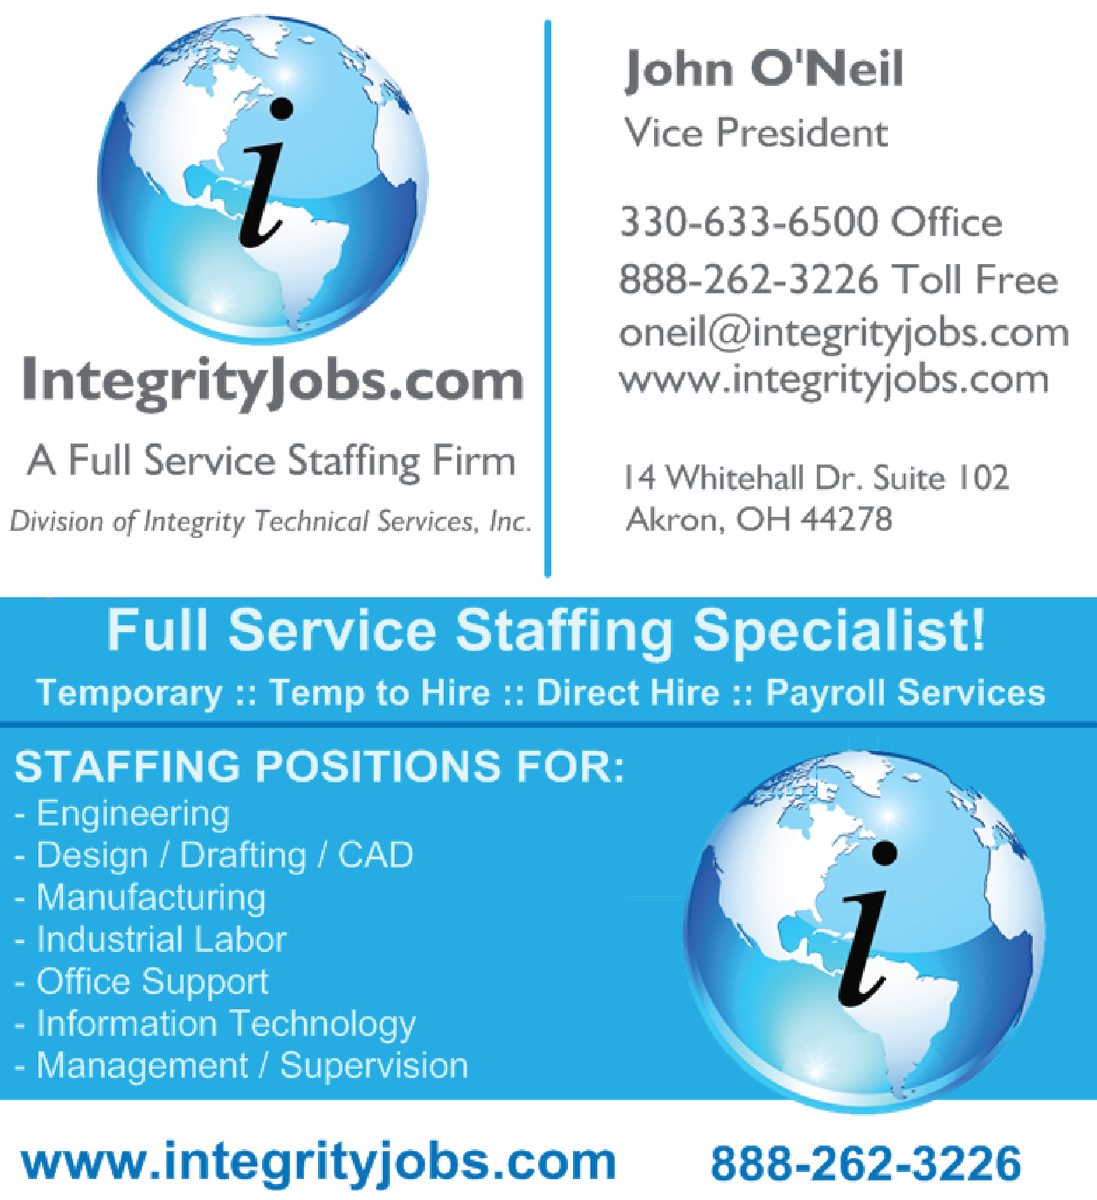 FRIDAY JOBS REPORT - JANUARY 20, 2023
View 300+ Career Opportunities at integrityjobs.com - Toll Free USA: (888)-262-3226
Forward Resumes to: resumes@integrityjobs.com

#Costestimator #manufacturing #cncprogrammer #cncmachine #robotics #automatedrobots